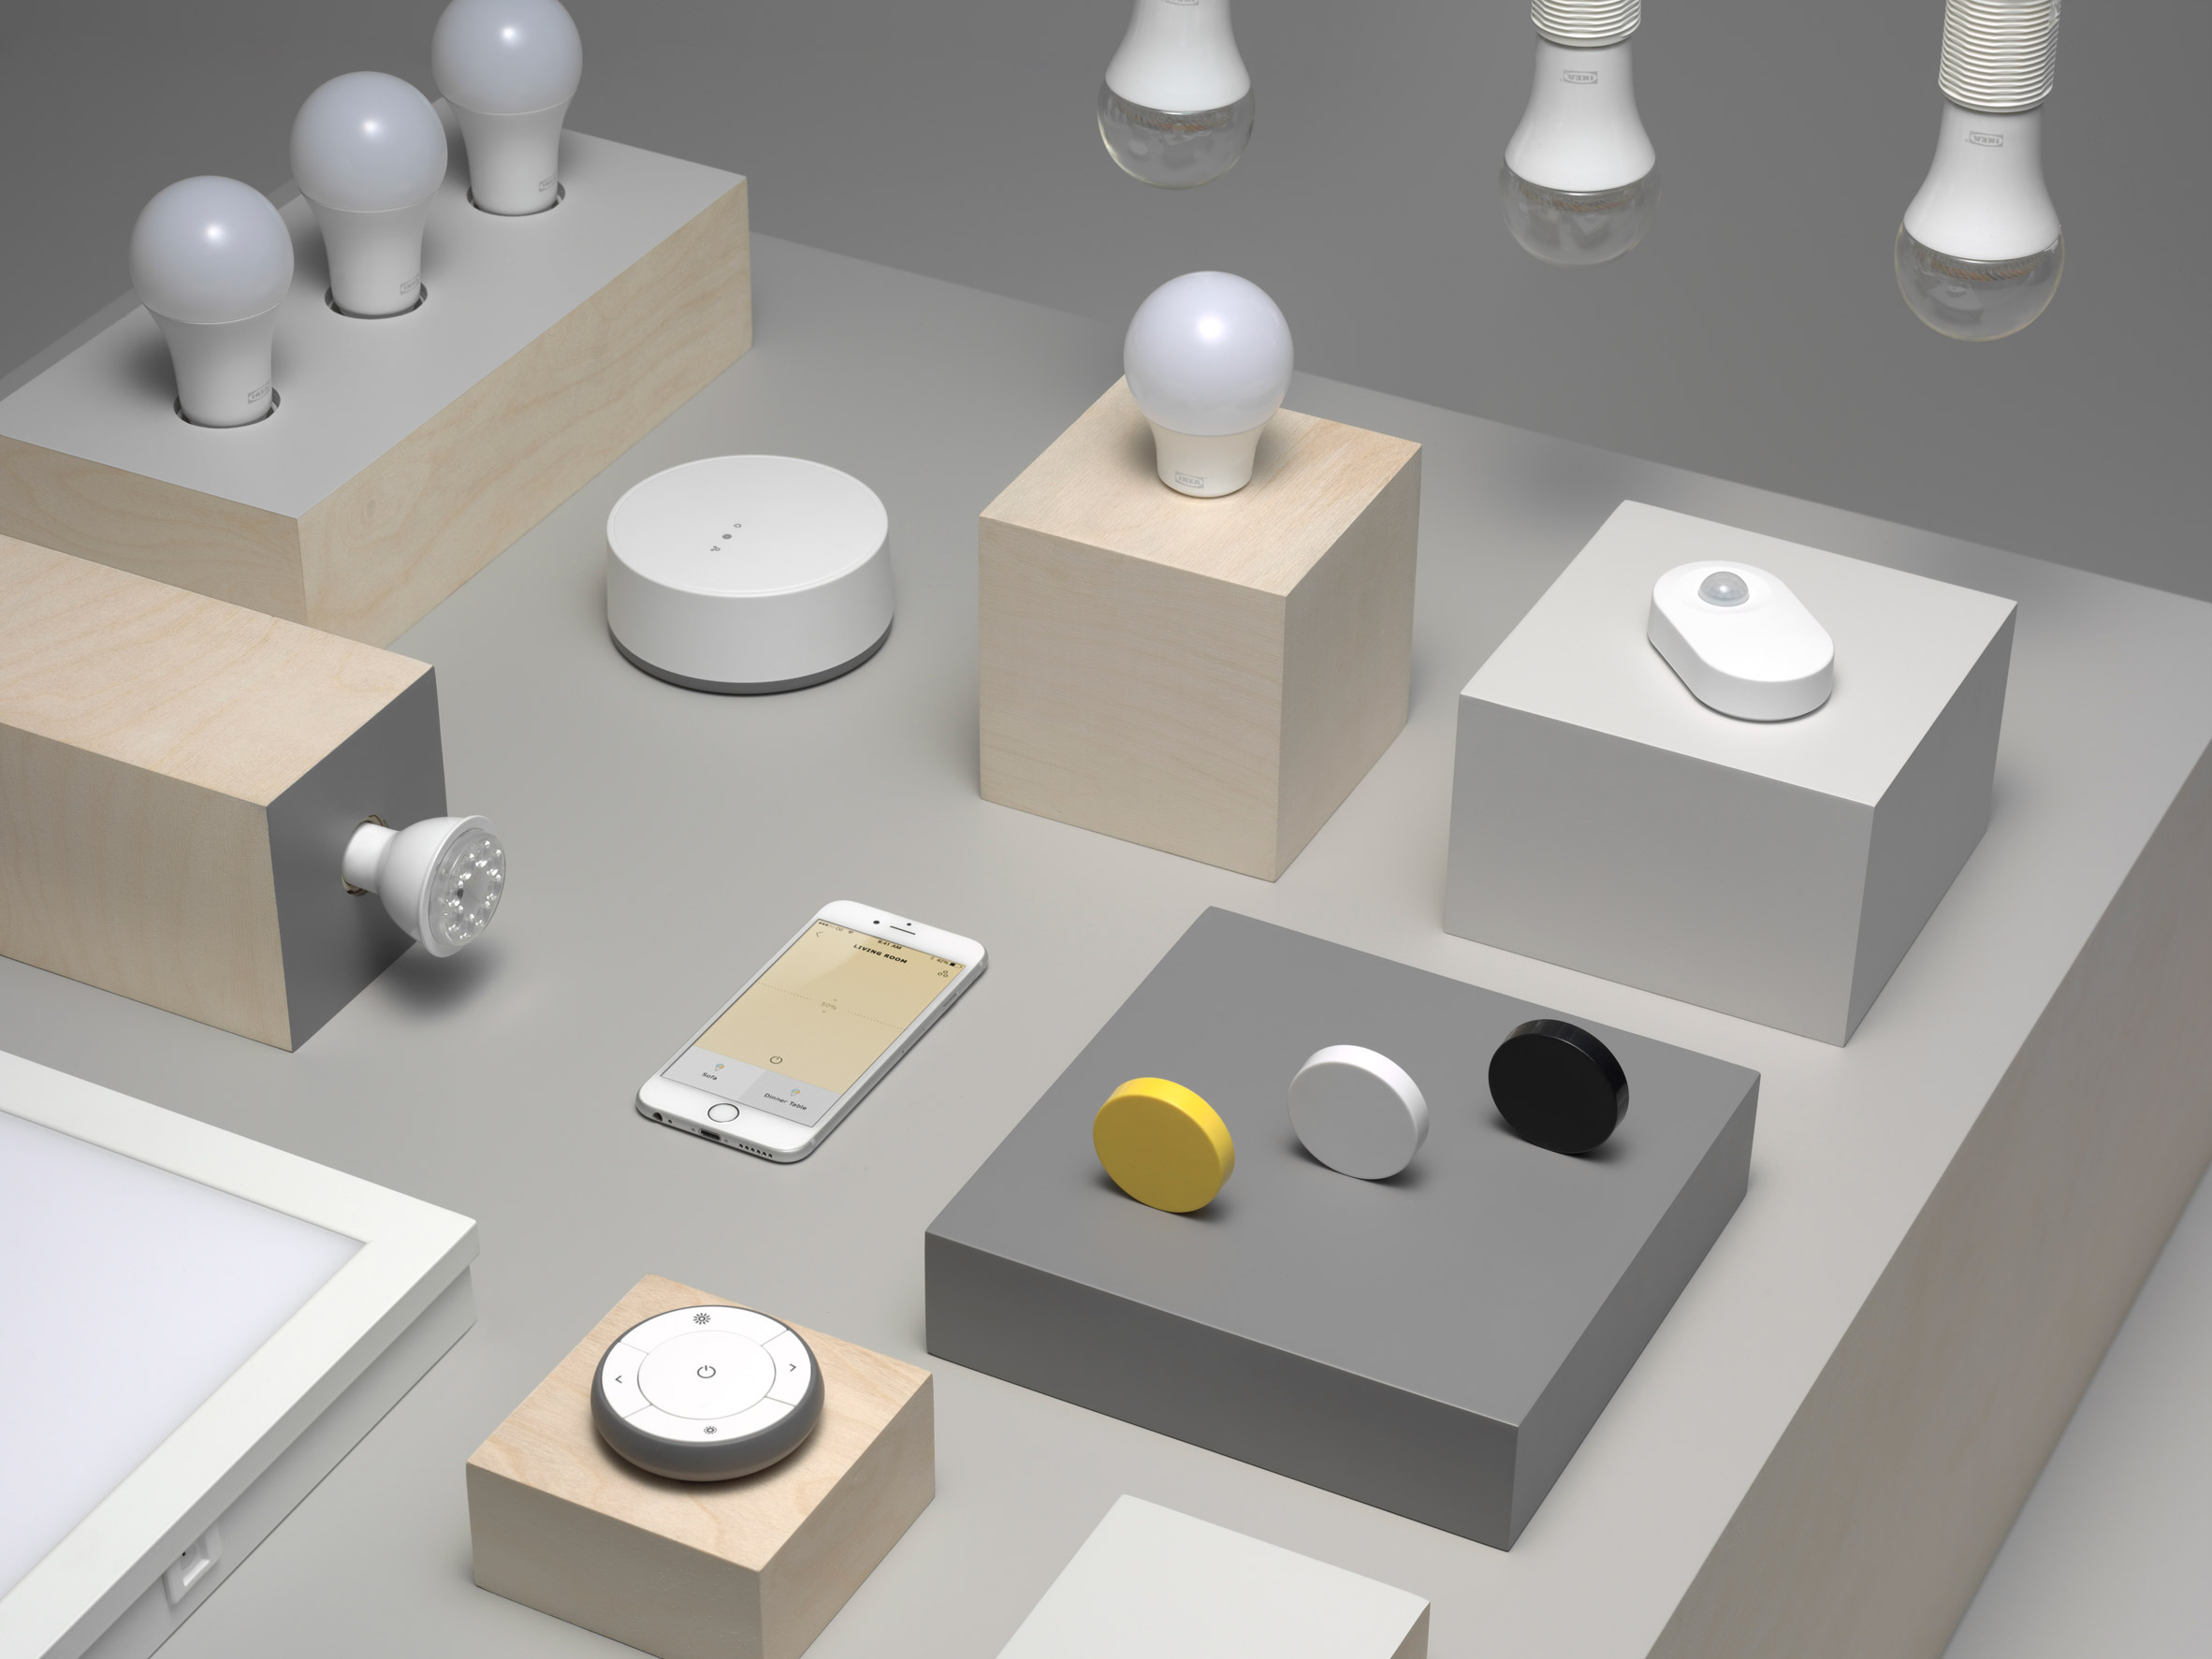 ventures into smart home with Trådfri lighting